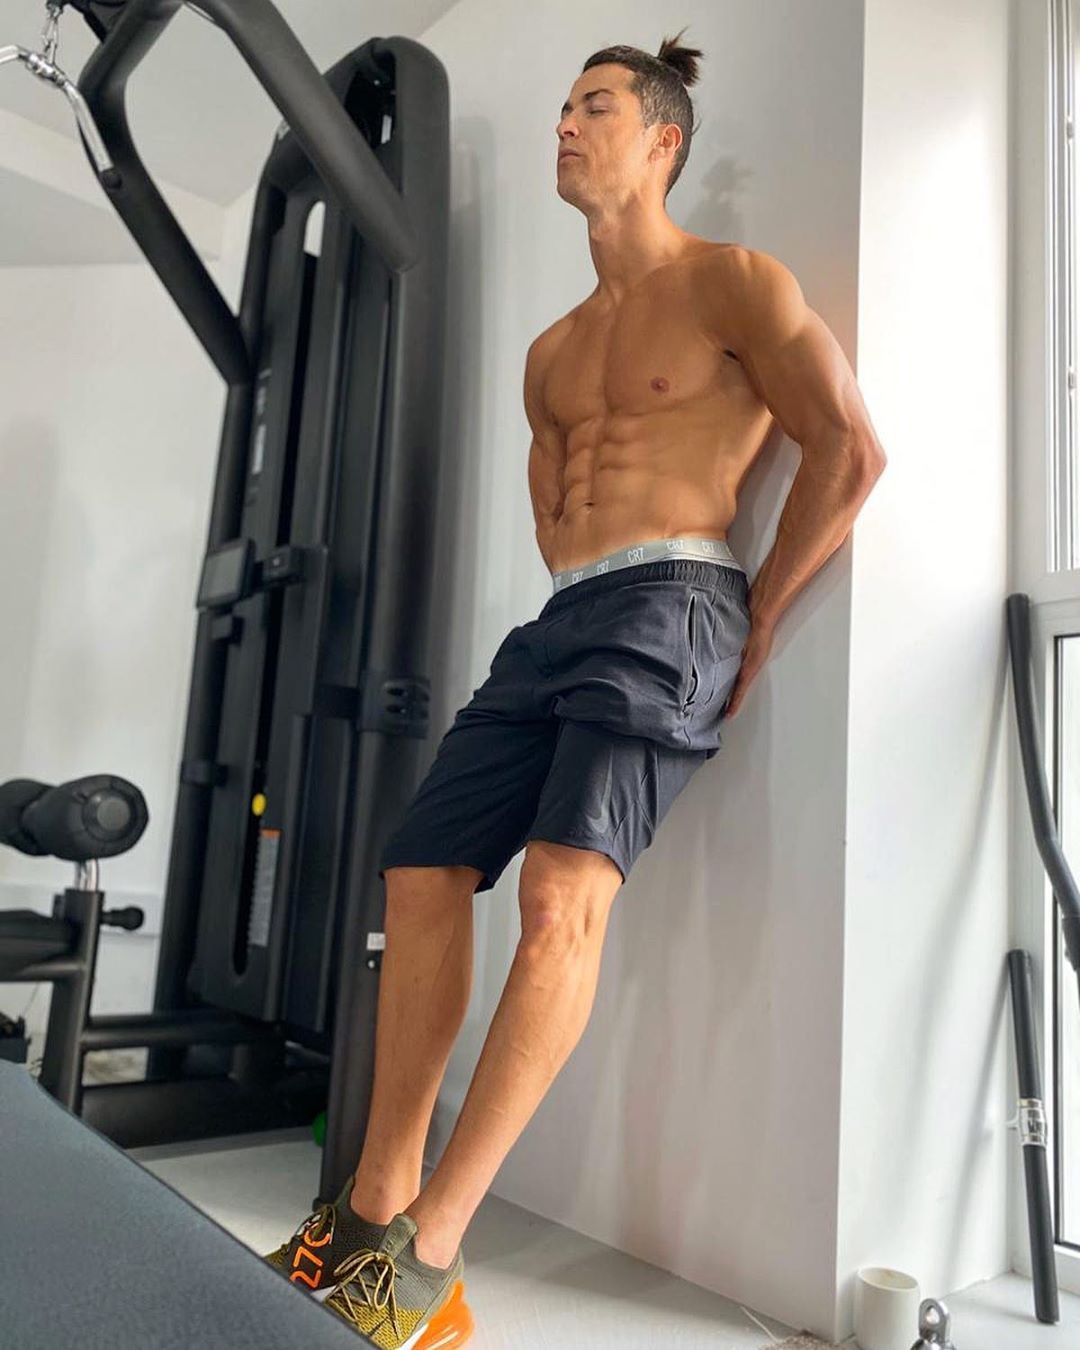  Ronaldo has been happy to show of his tough workouts on Instagram